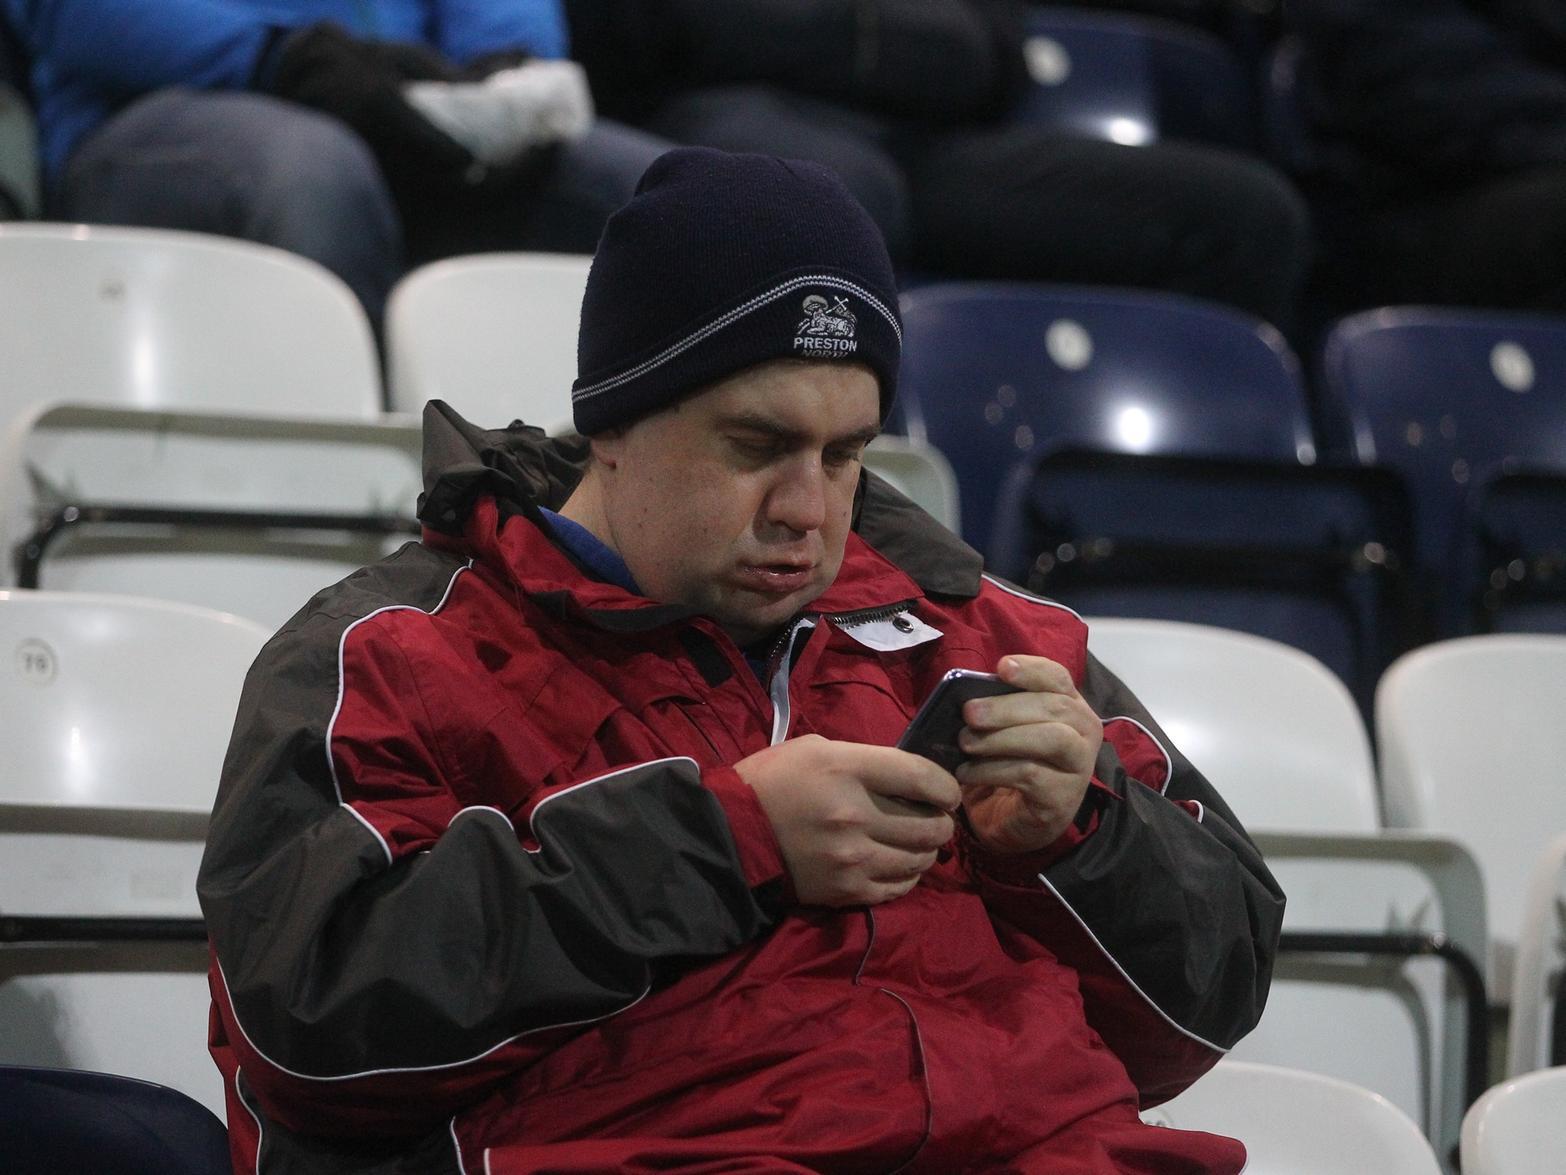 One fan checks their phone before the night's game.